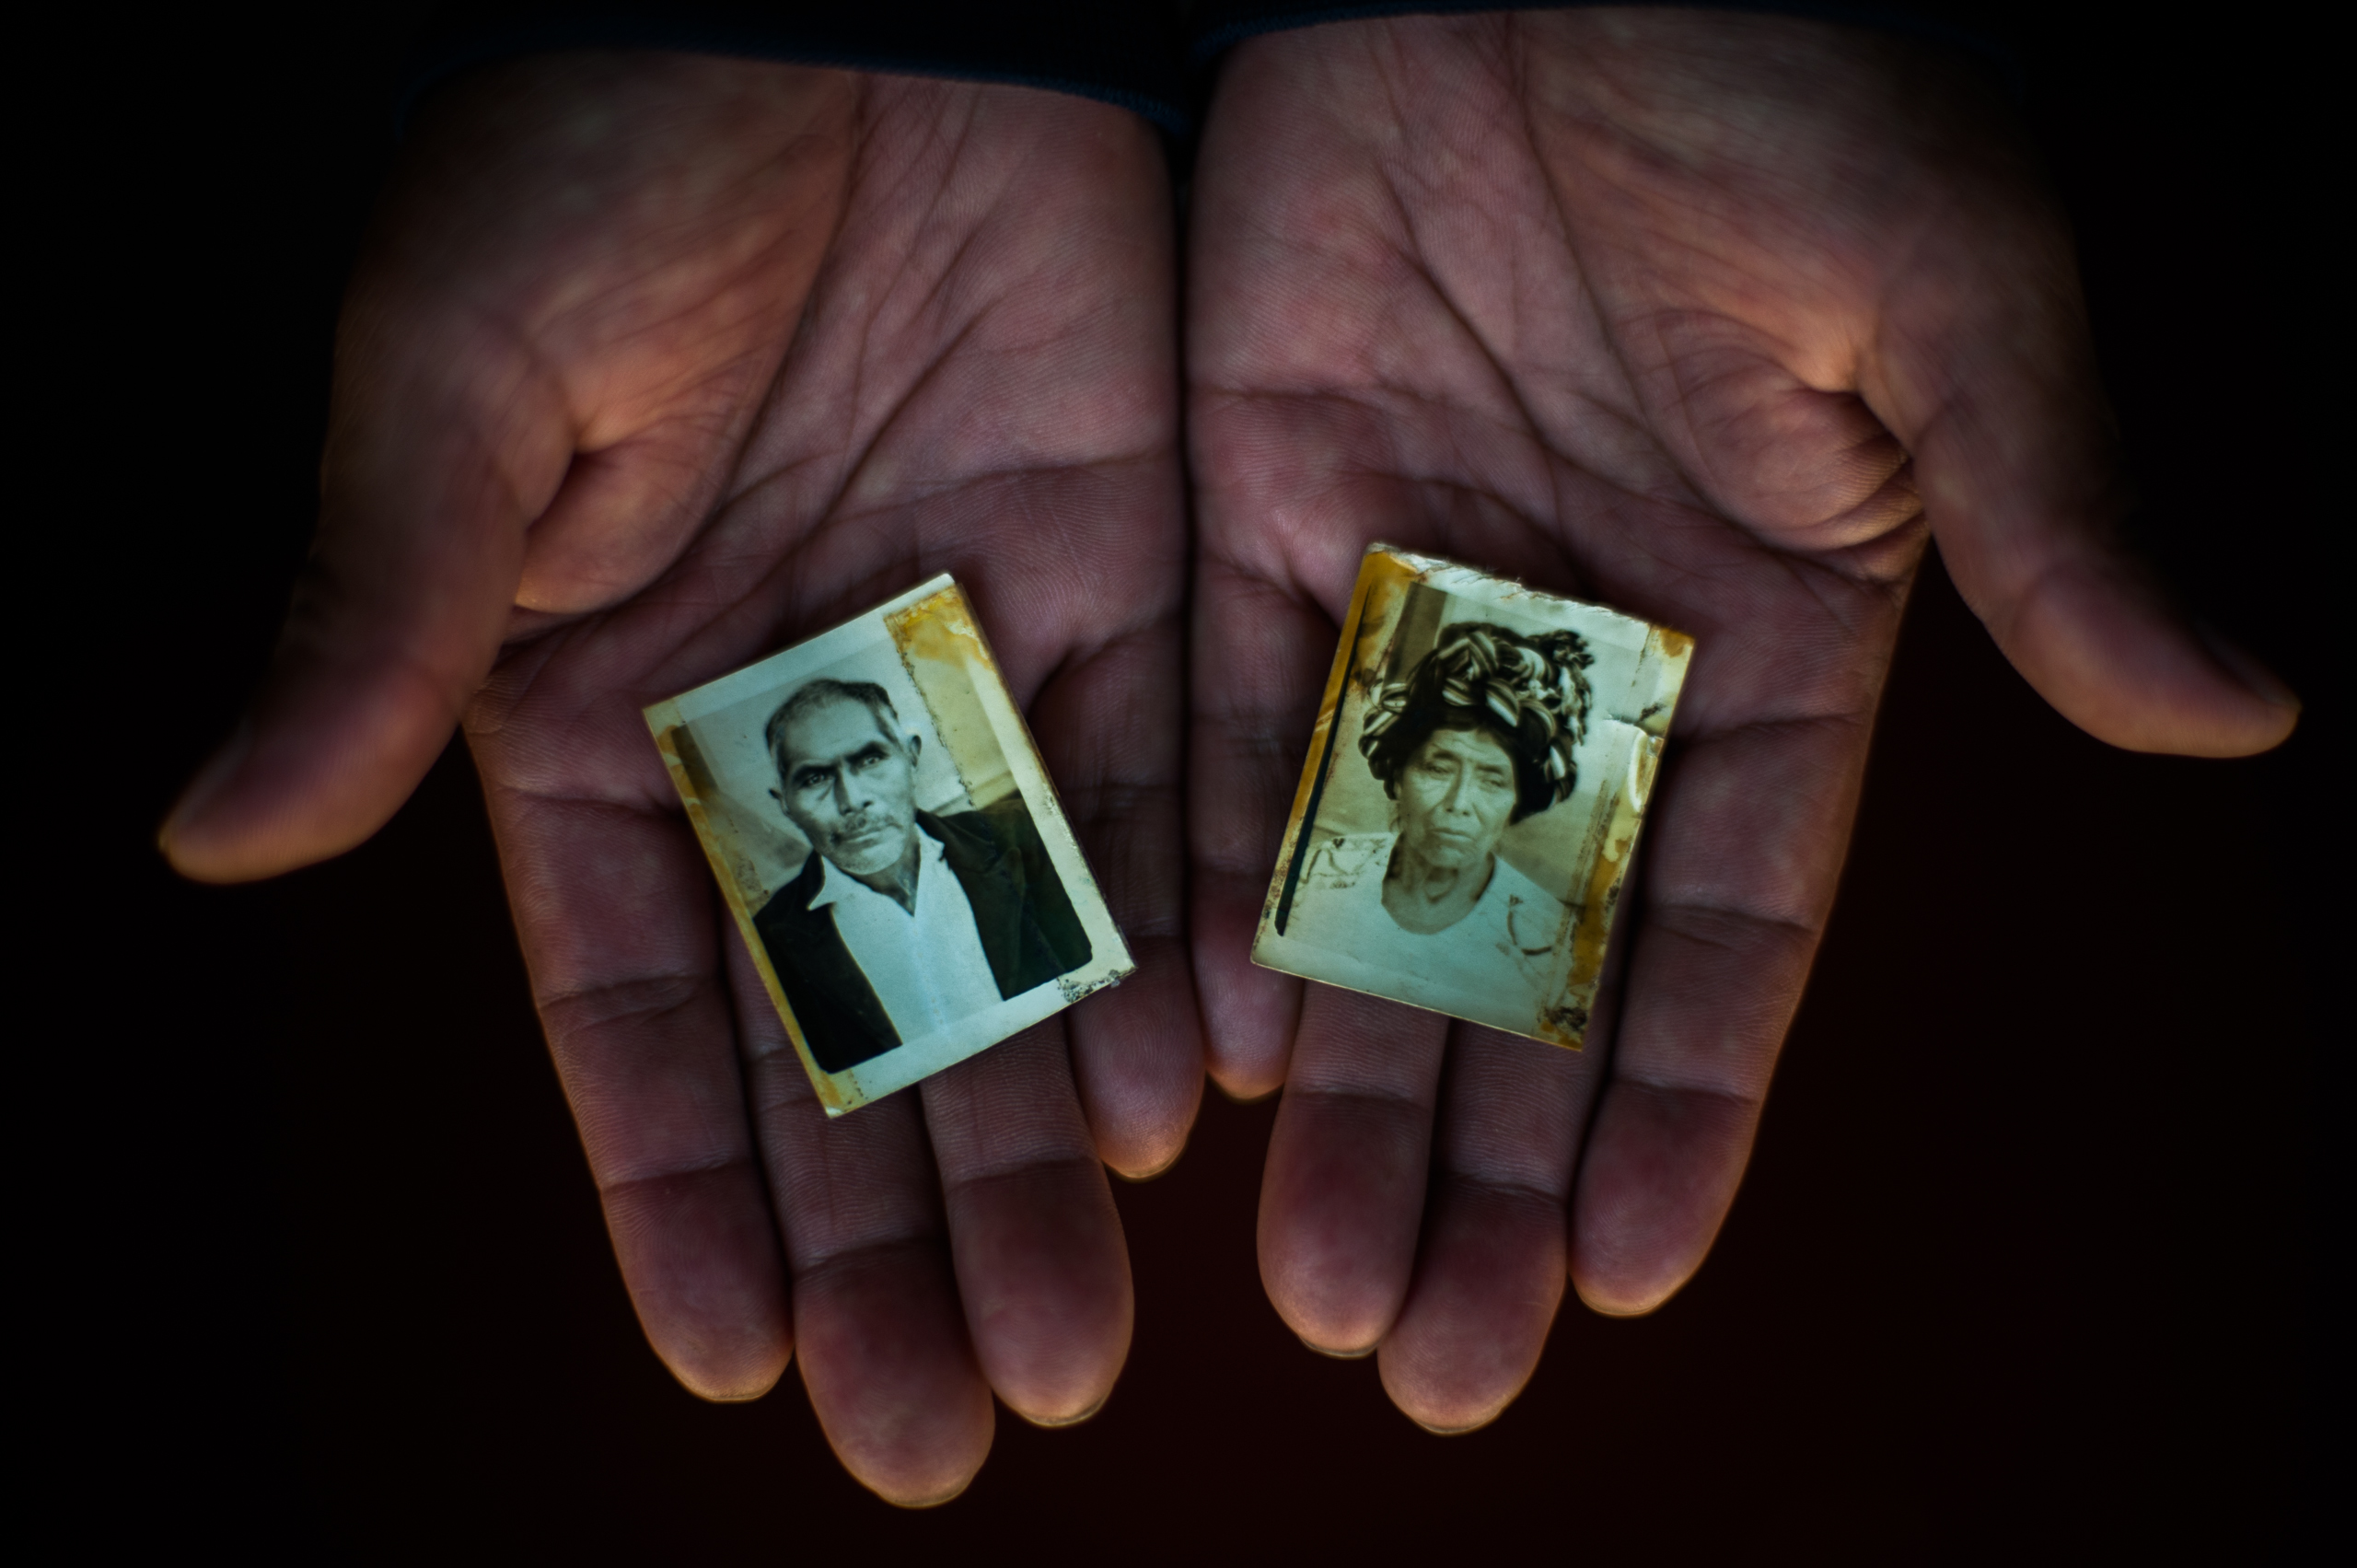 Baltazar Maton Terraza, 80, and Catarina de Paz, 78, husband and wife. She died in the Vicalamá mountain on August 22, 1982. He died in the Amajchel mountains on February 1988. Both were members of the CPR and died of starvation and cold.